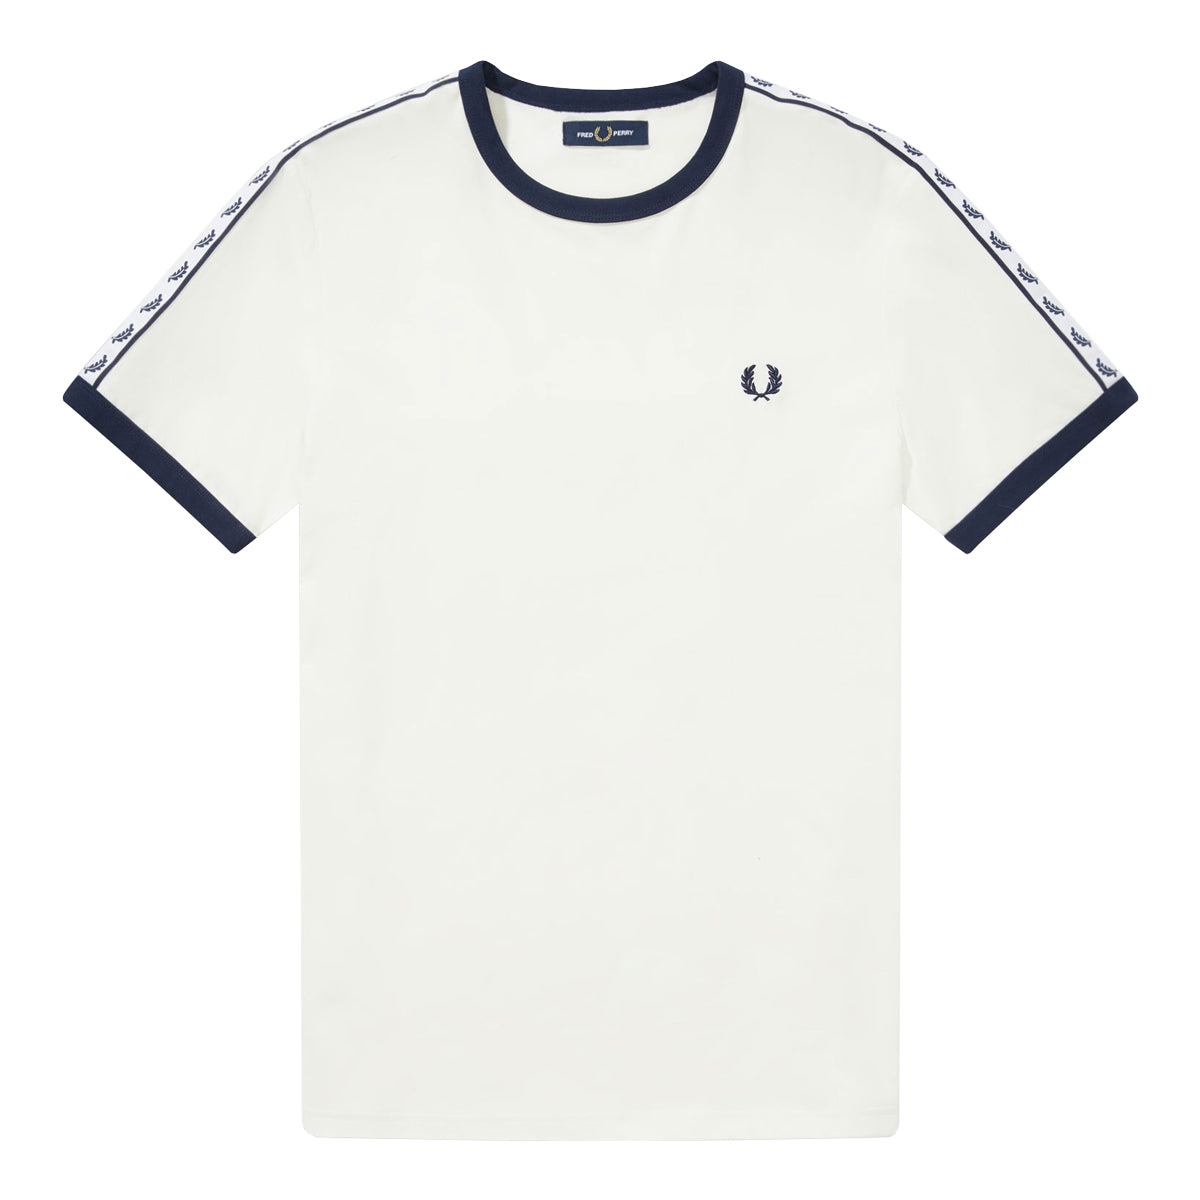 Fred Perry Taped Ringer T-Shirt Snow White/Carbon Blue. Foto de frente.